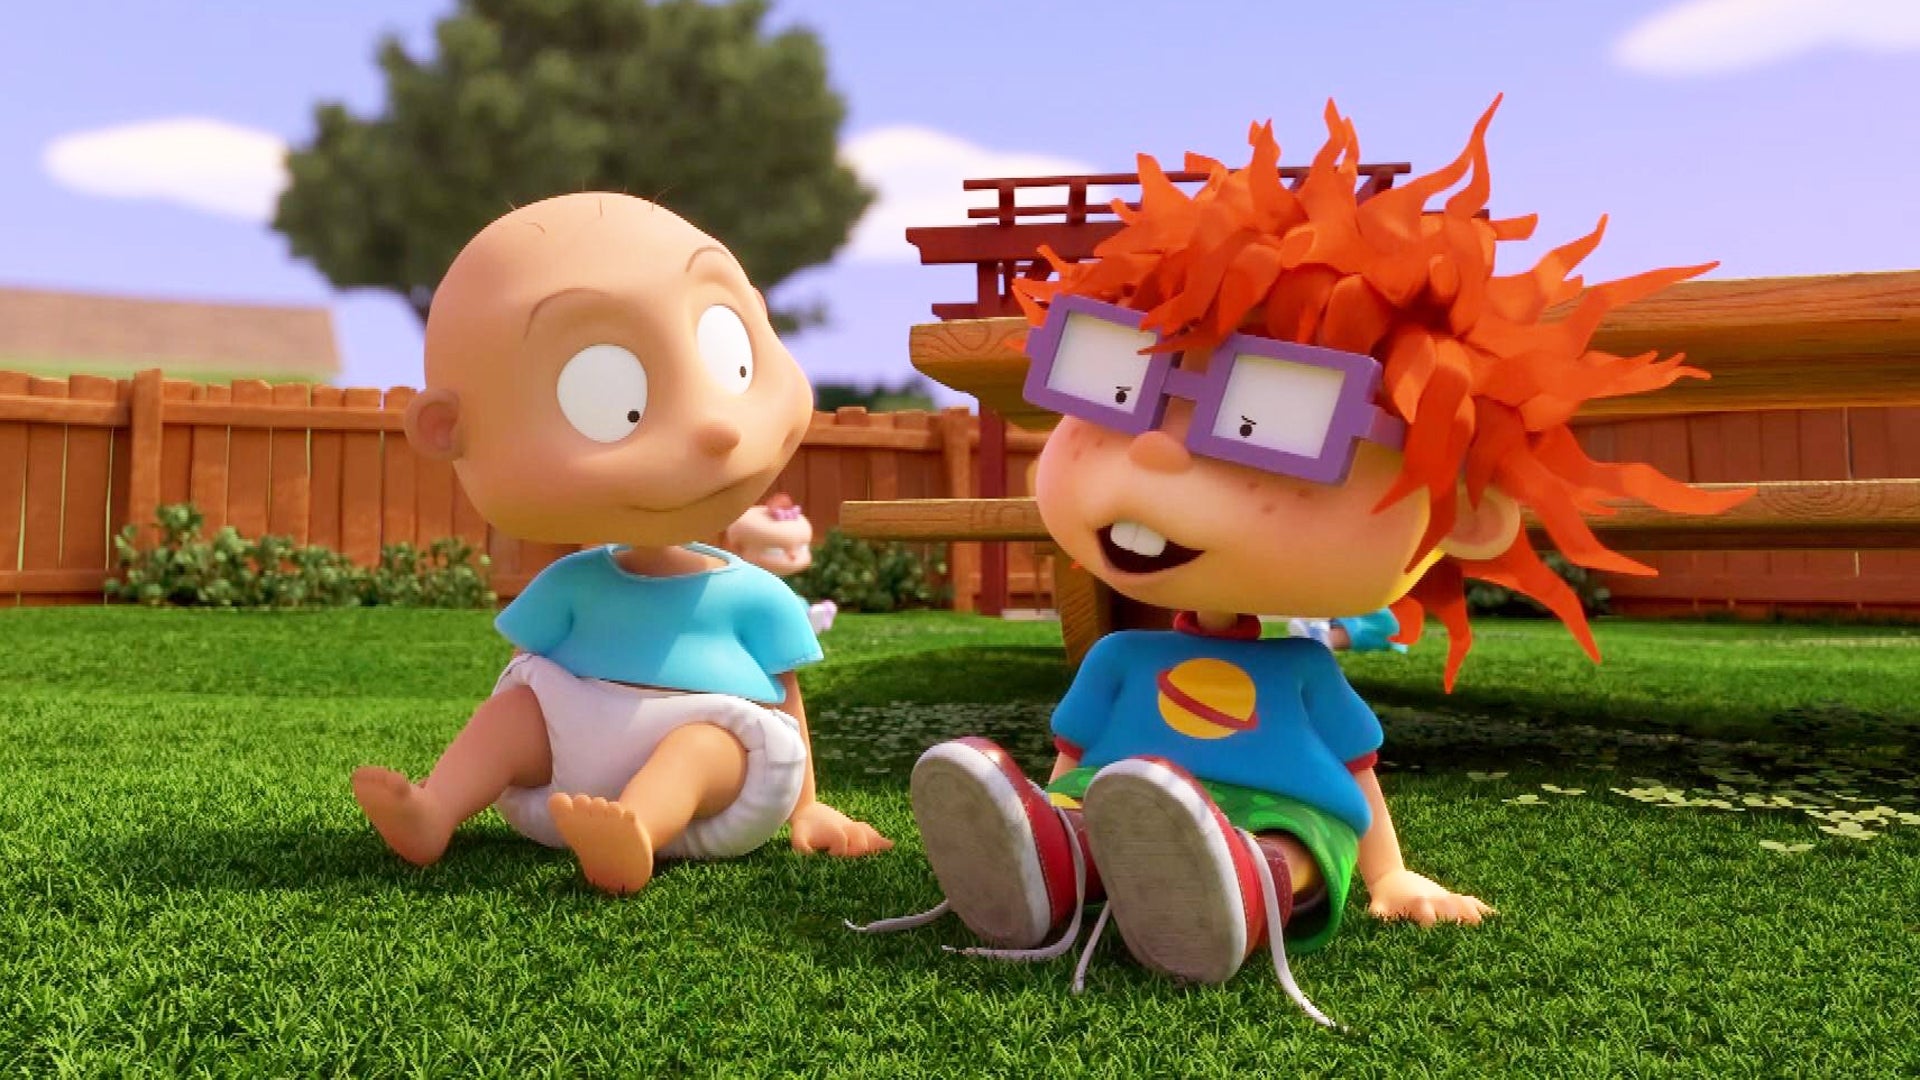 Rugrats To Debut Four Shorts Including Reimagined Classic Scenes Exclusive Entertainment Tonight